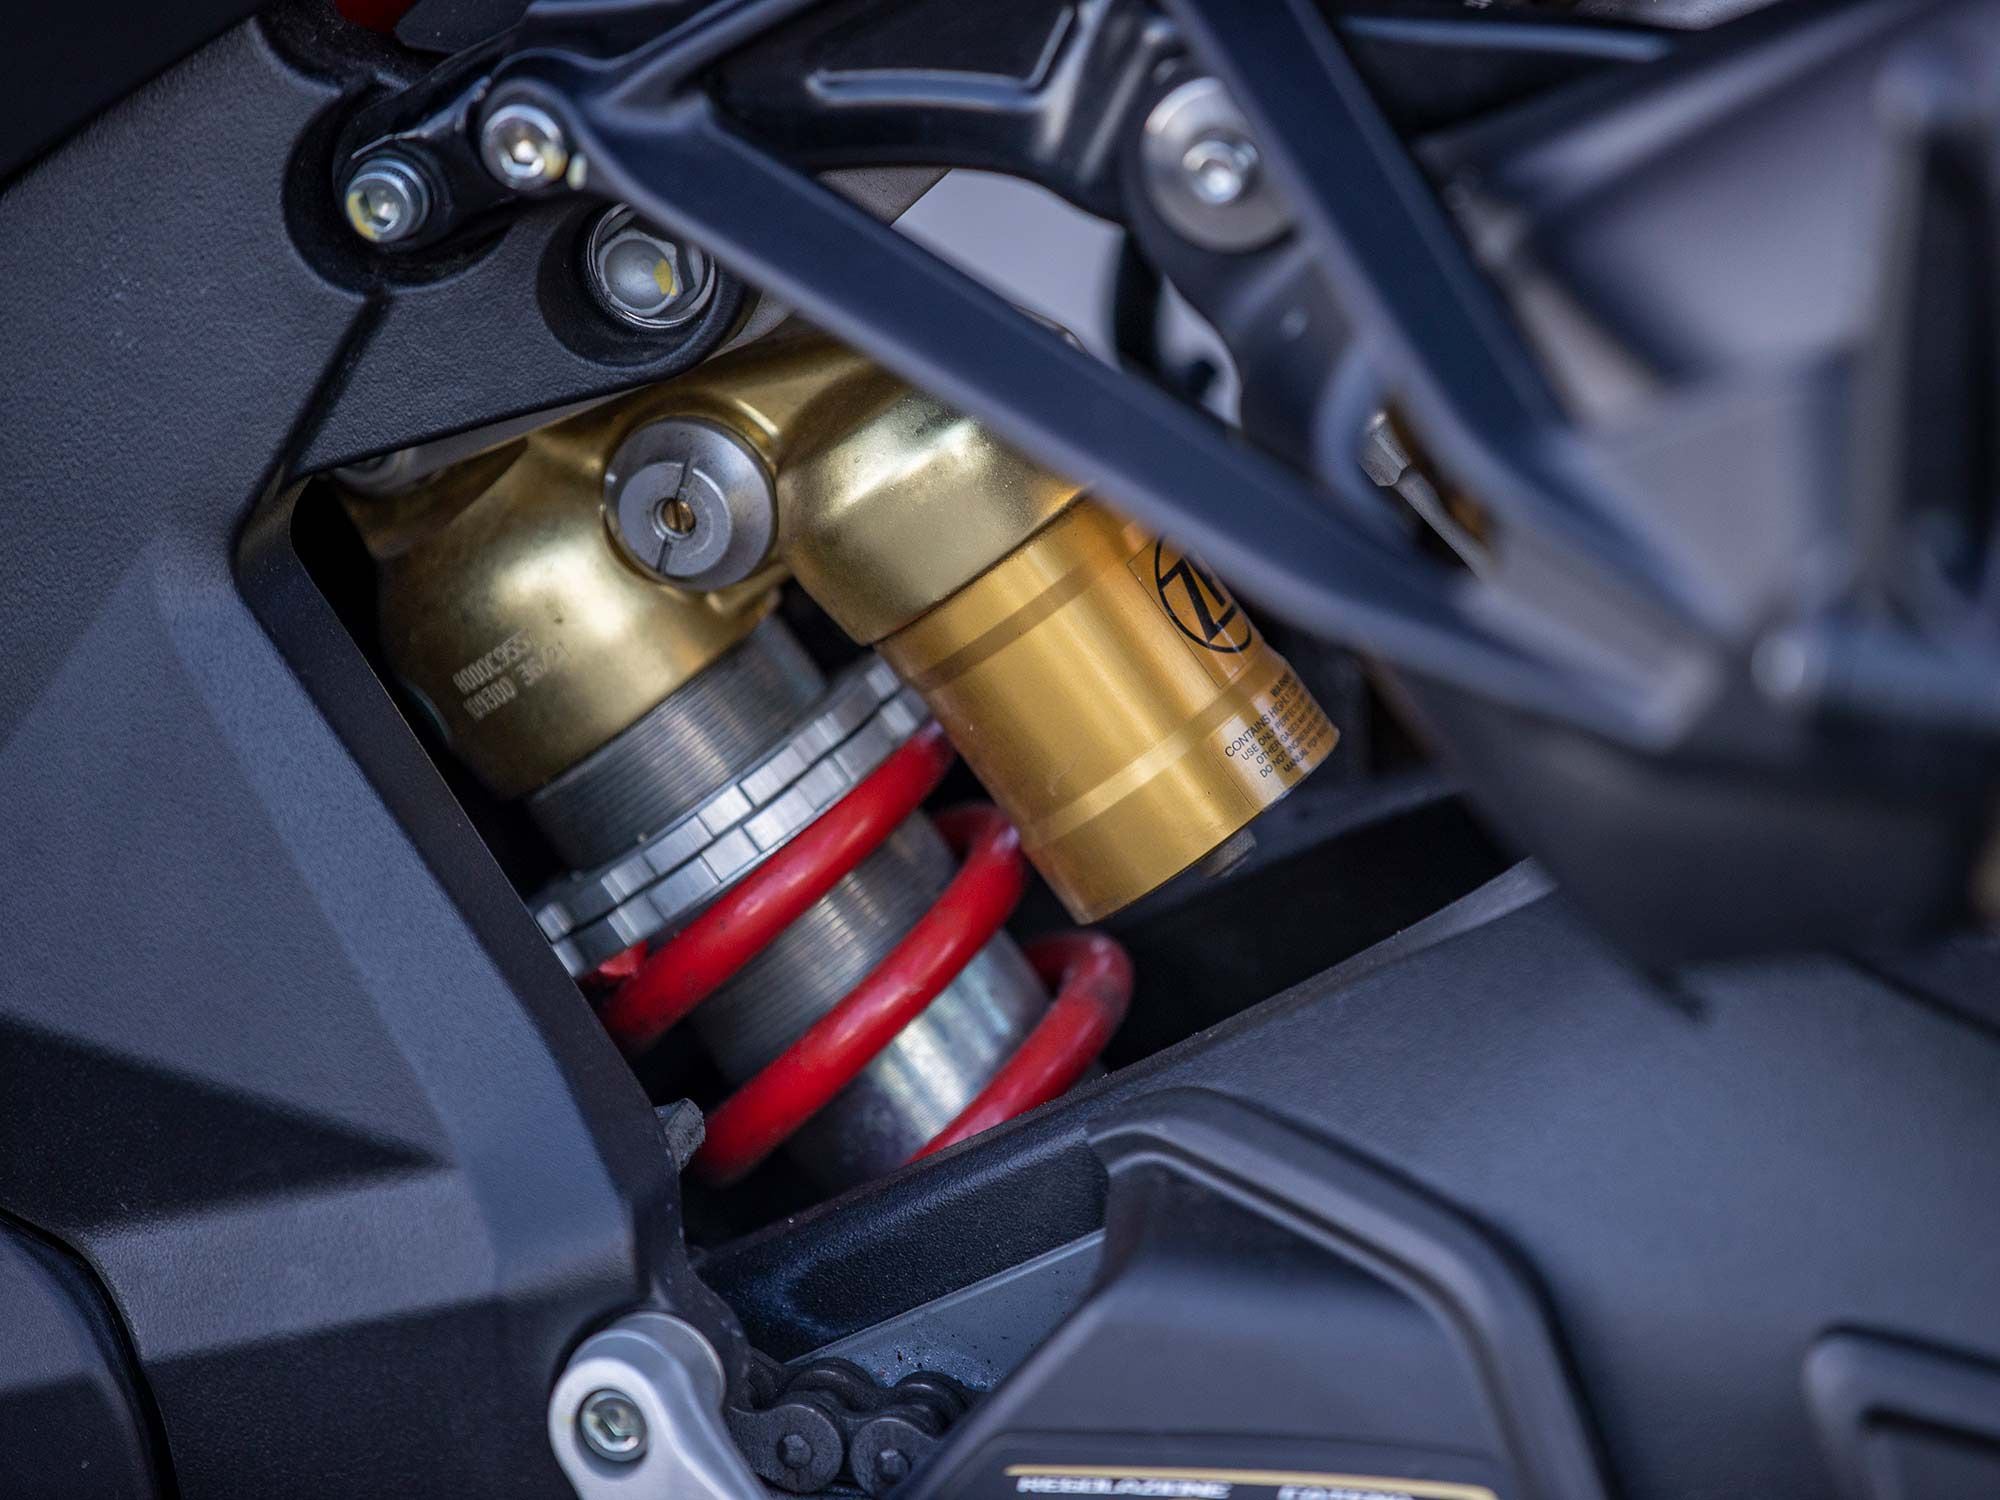 A Sachs piggyback-style reservoir shock features manually adjustable spring preload, high- and low-speed compression damping, and rebound damping with plenty of adjustment to suit many types and sizes of riders.